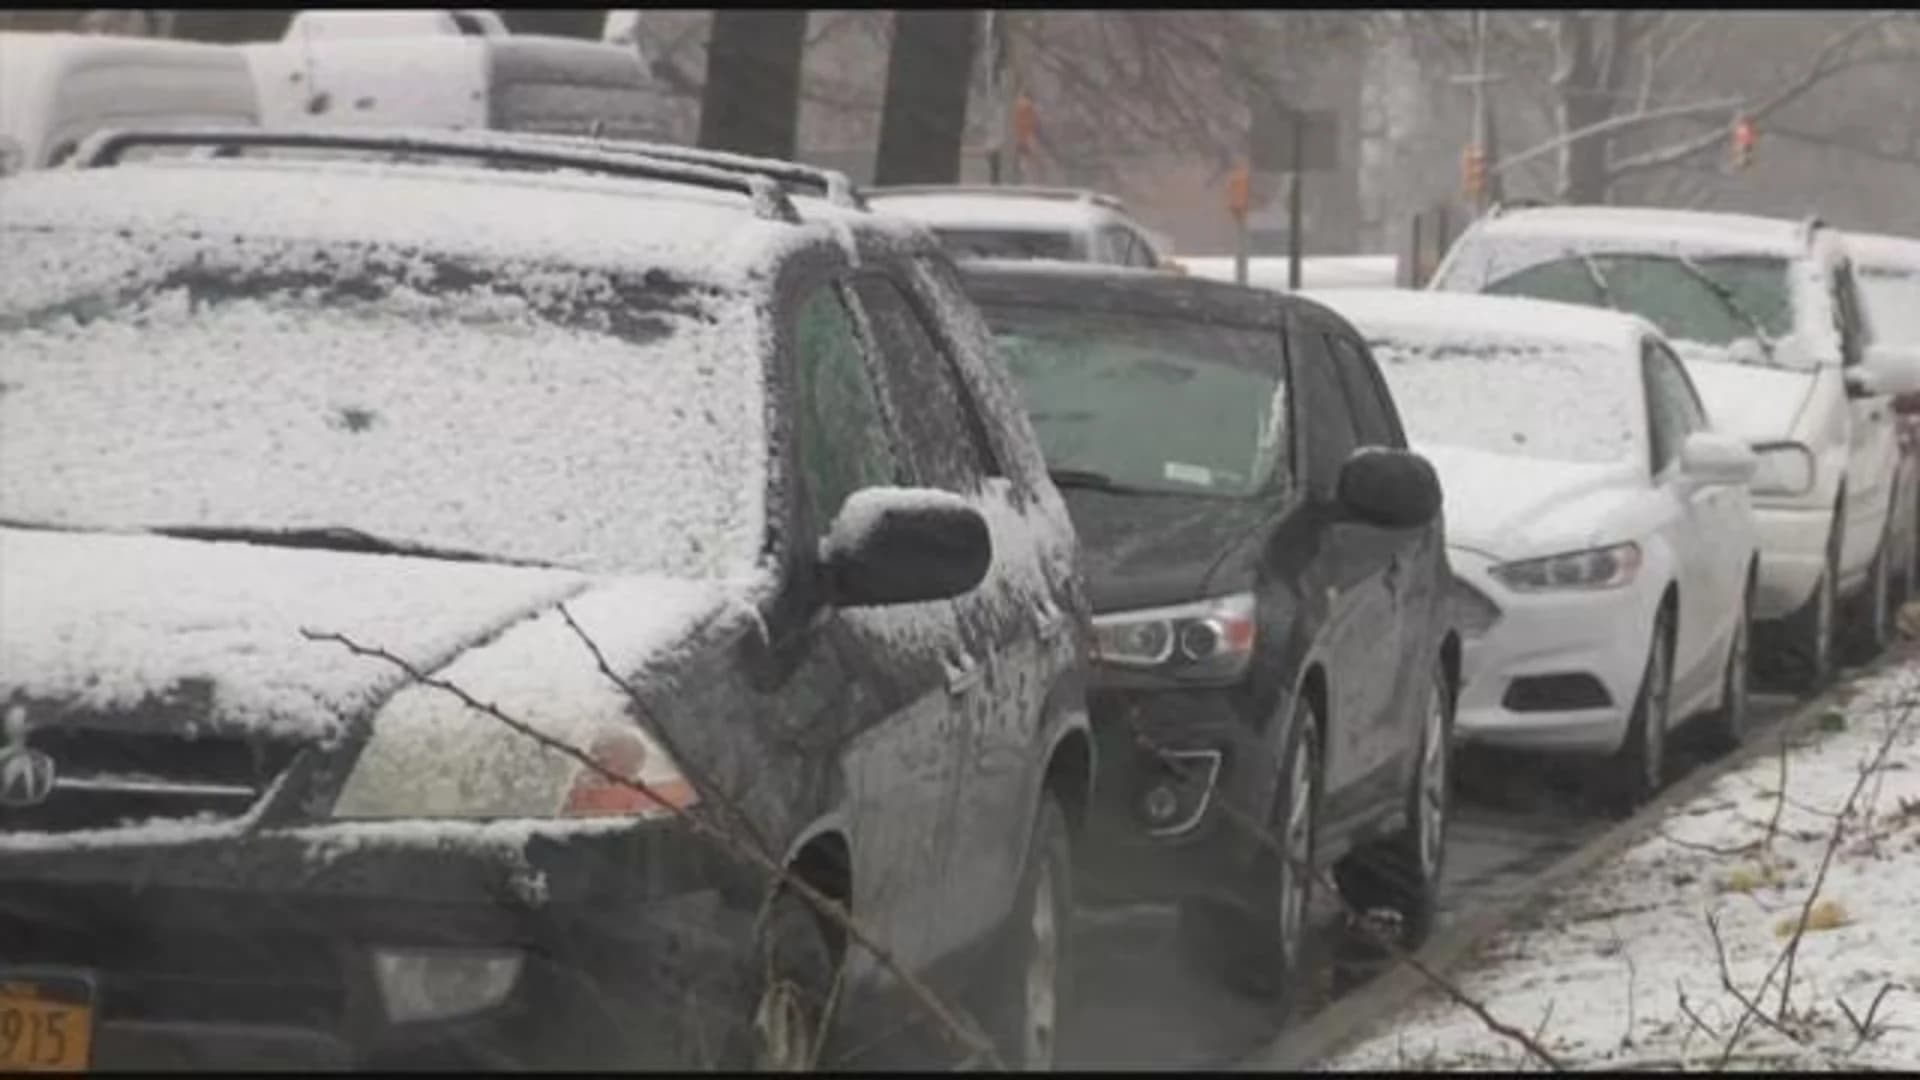 Snow tapers off as nor'easter passes through region